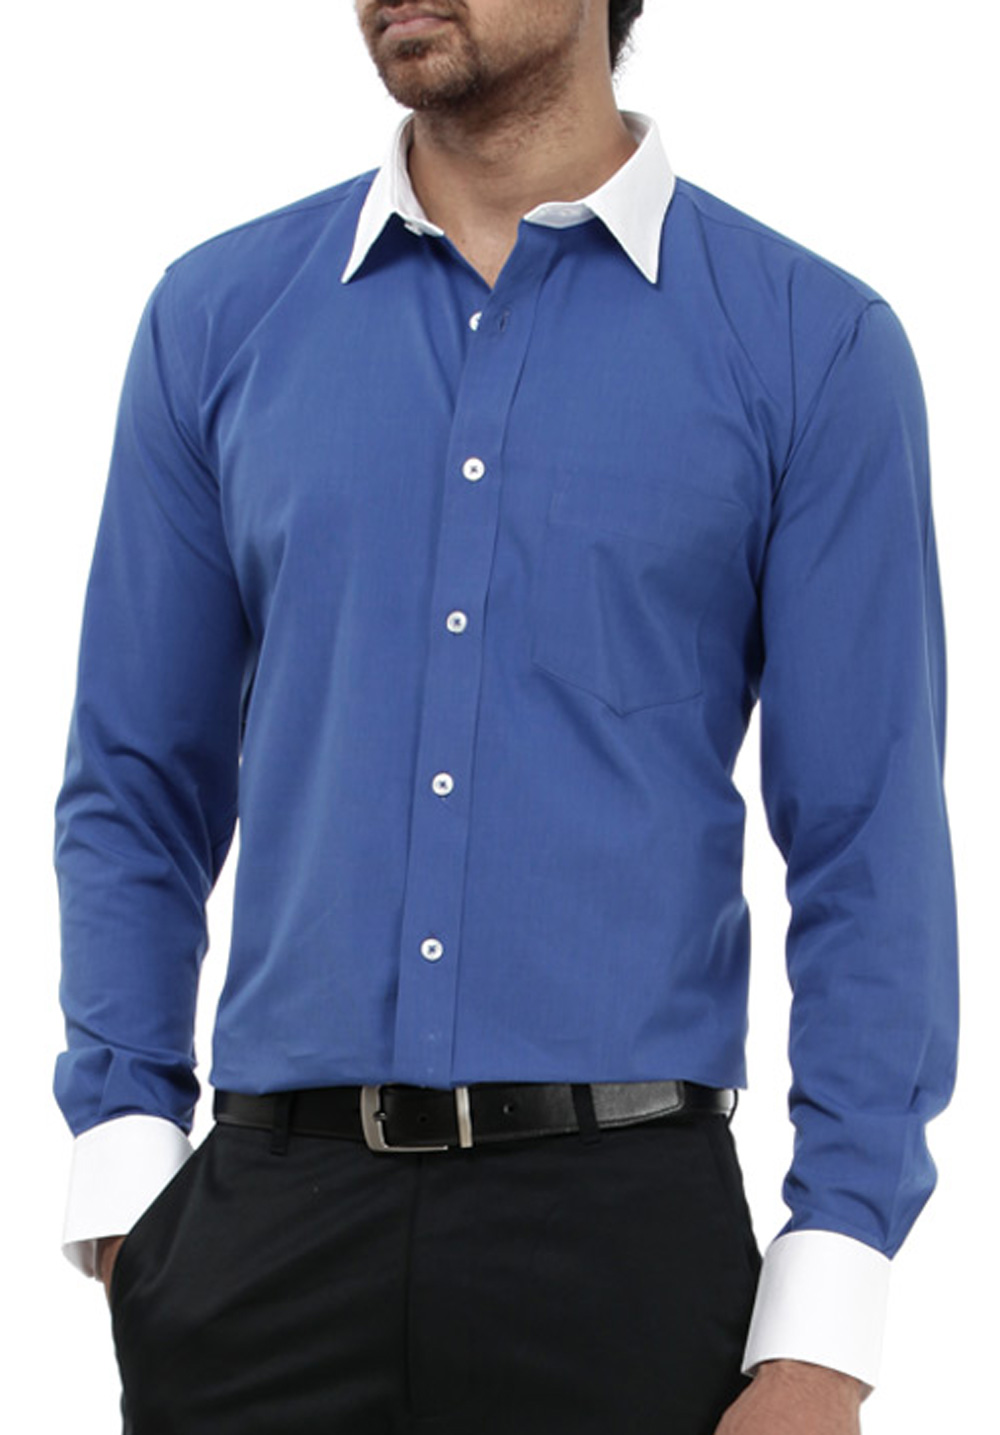 MEN’S SOLID COLOR SHIRT WITH CONTRAST CUFF AND COLLAR